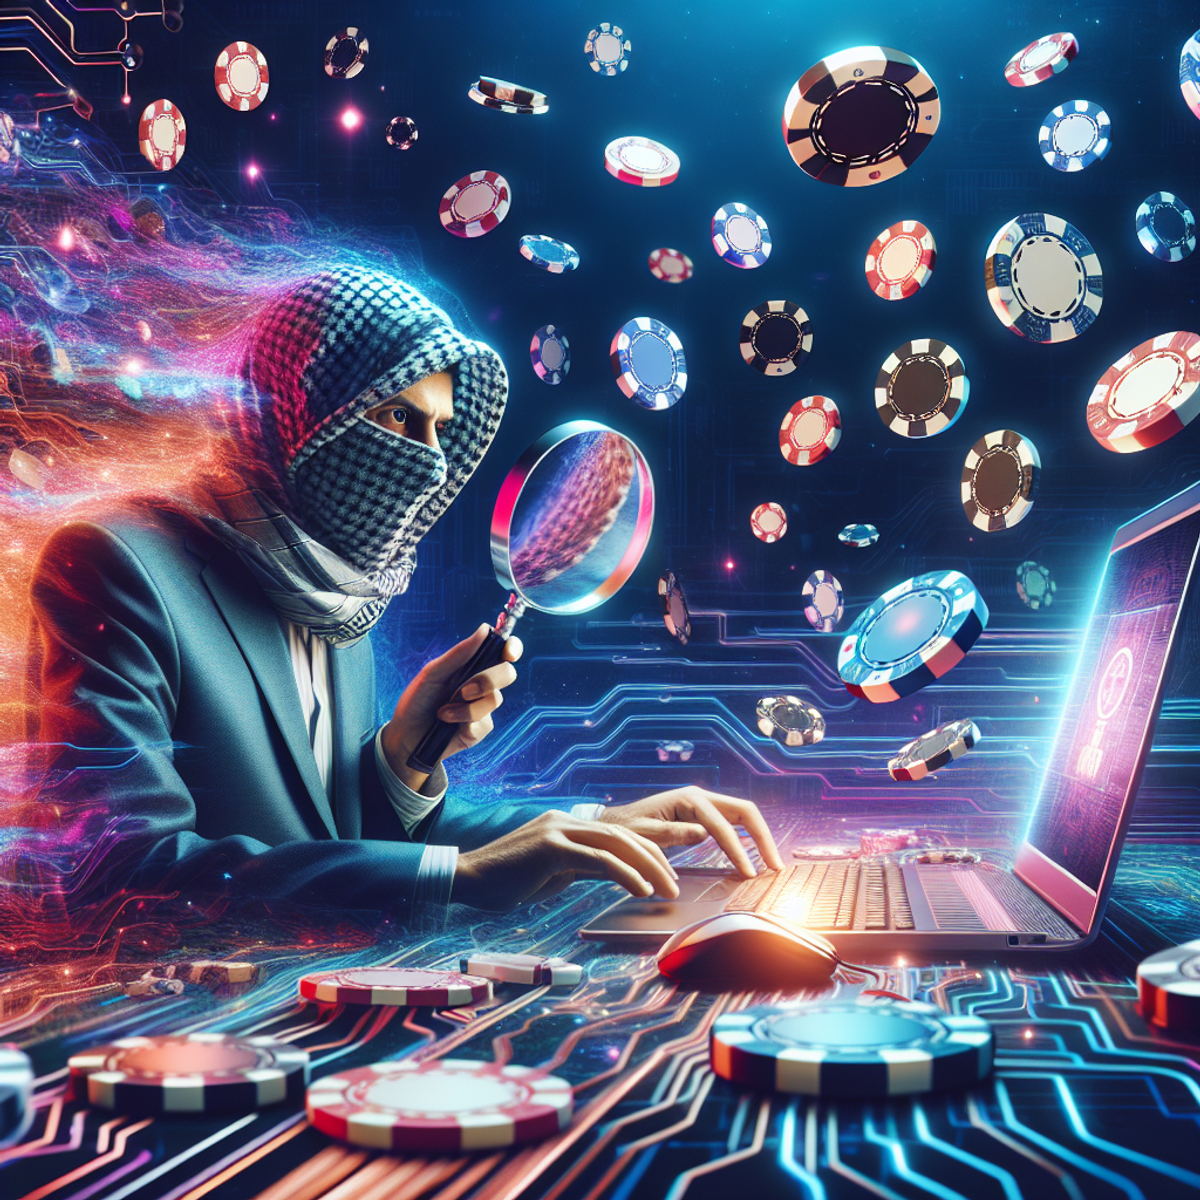 A man of Middle-Eastern descent sits at a computer surrounded by swirling technology symbols and virtual casino chips. A magnifying glass or detective